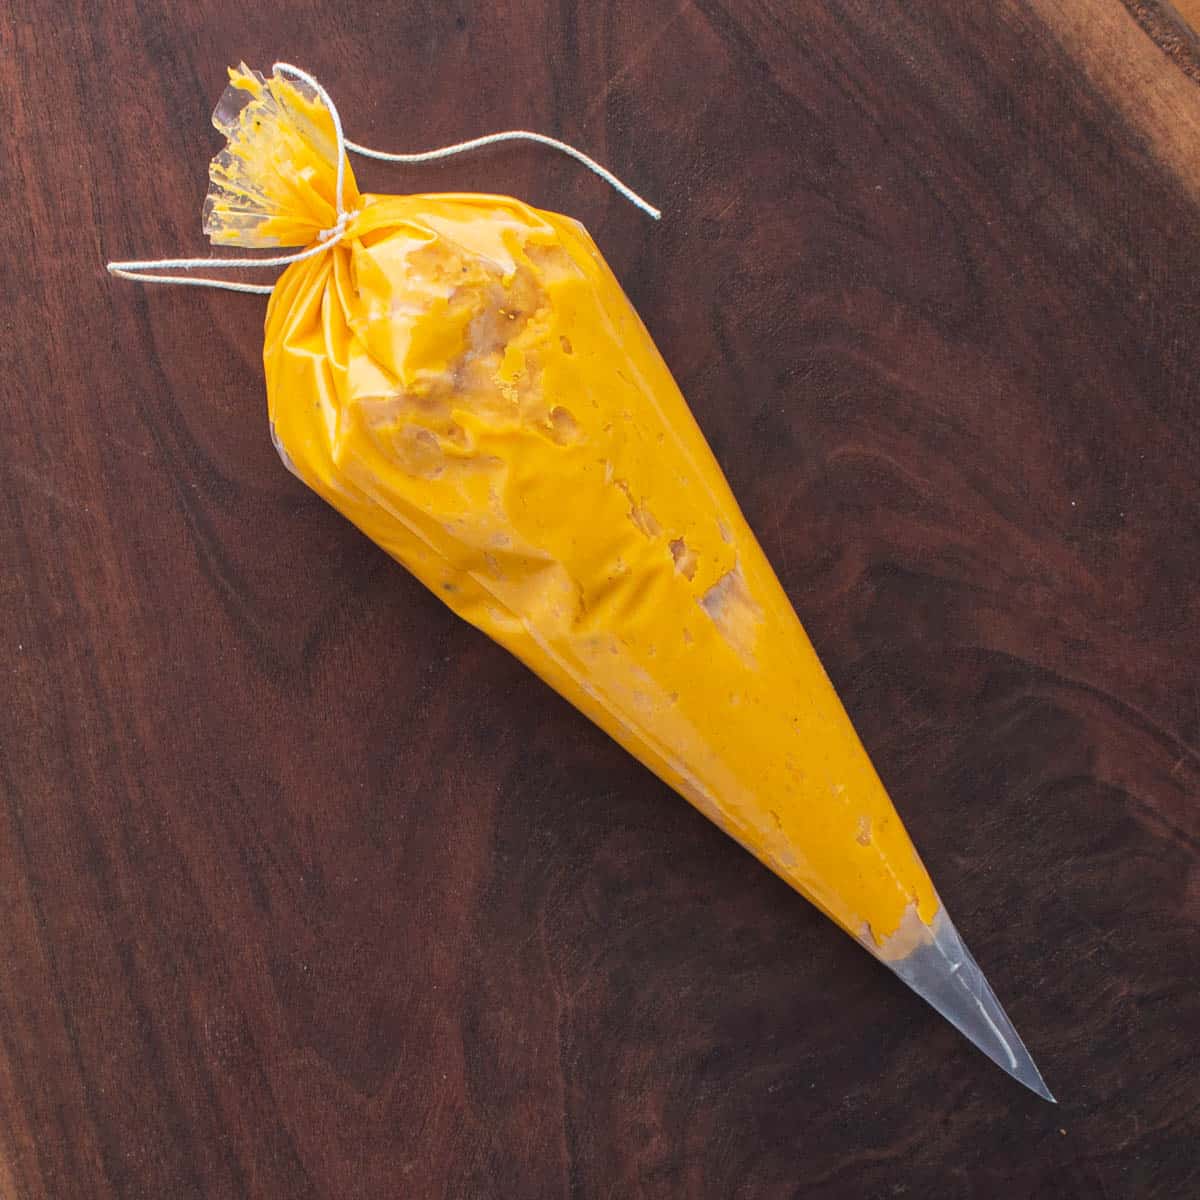 A piping bag filled with squash filling